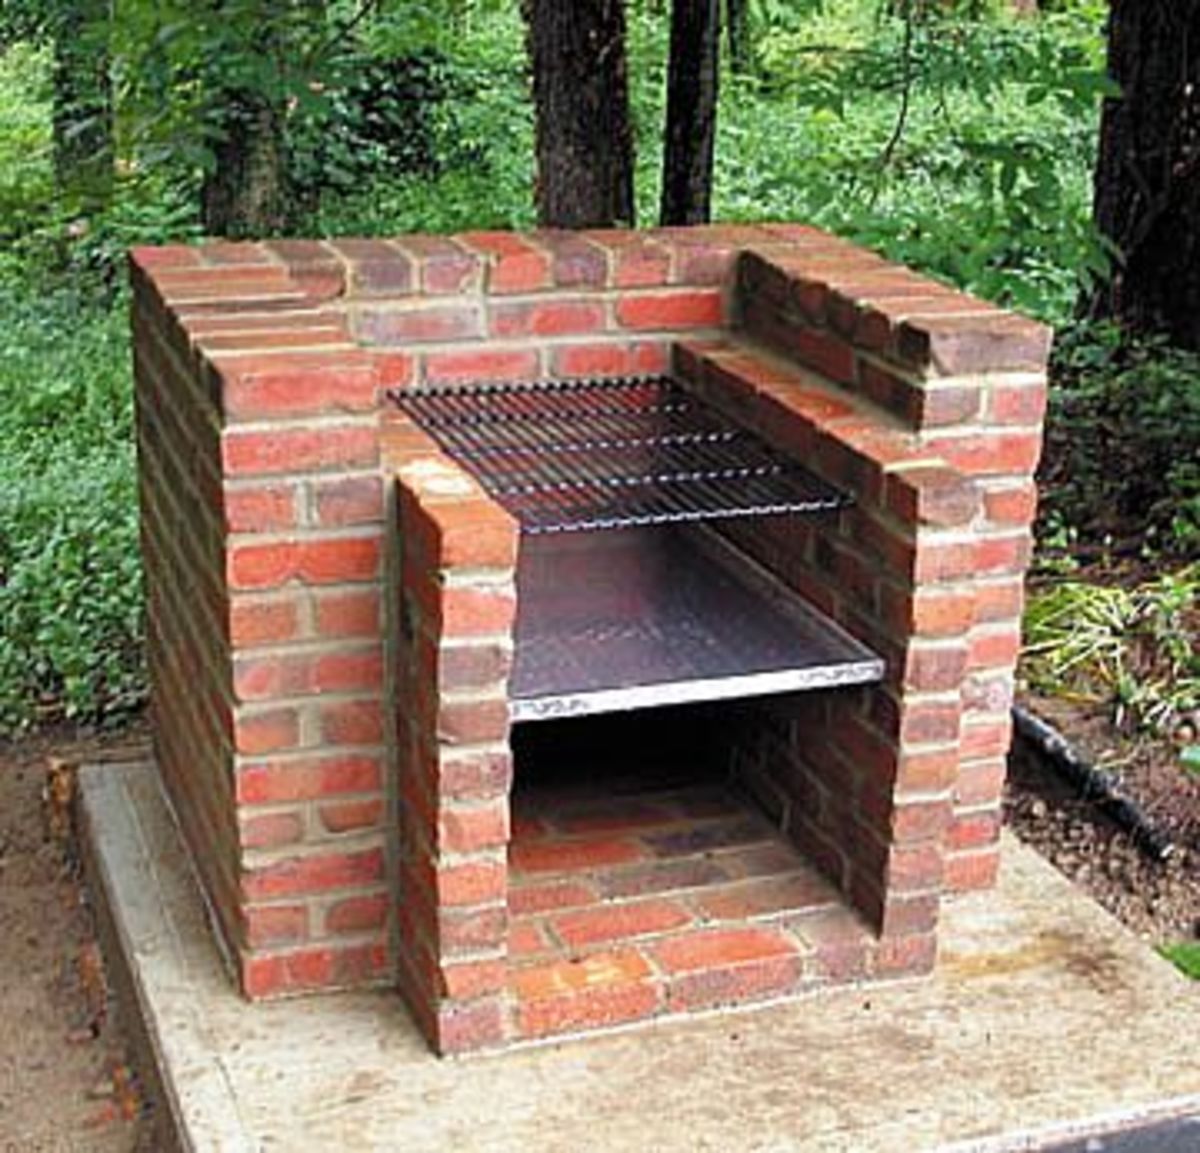 This is a conventional brick BBQ.